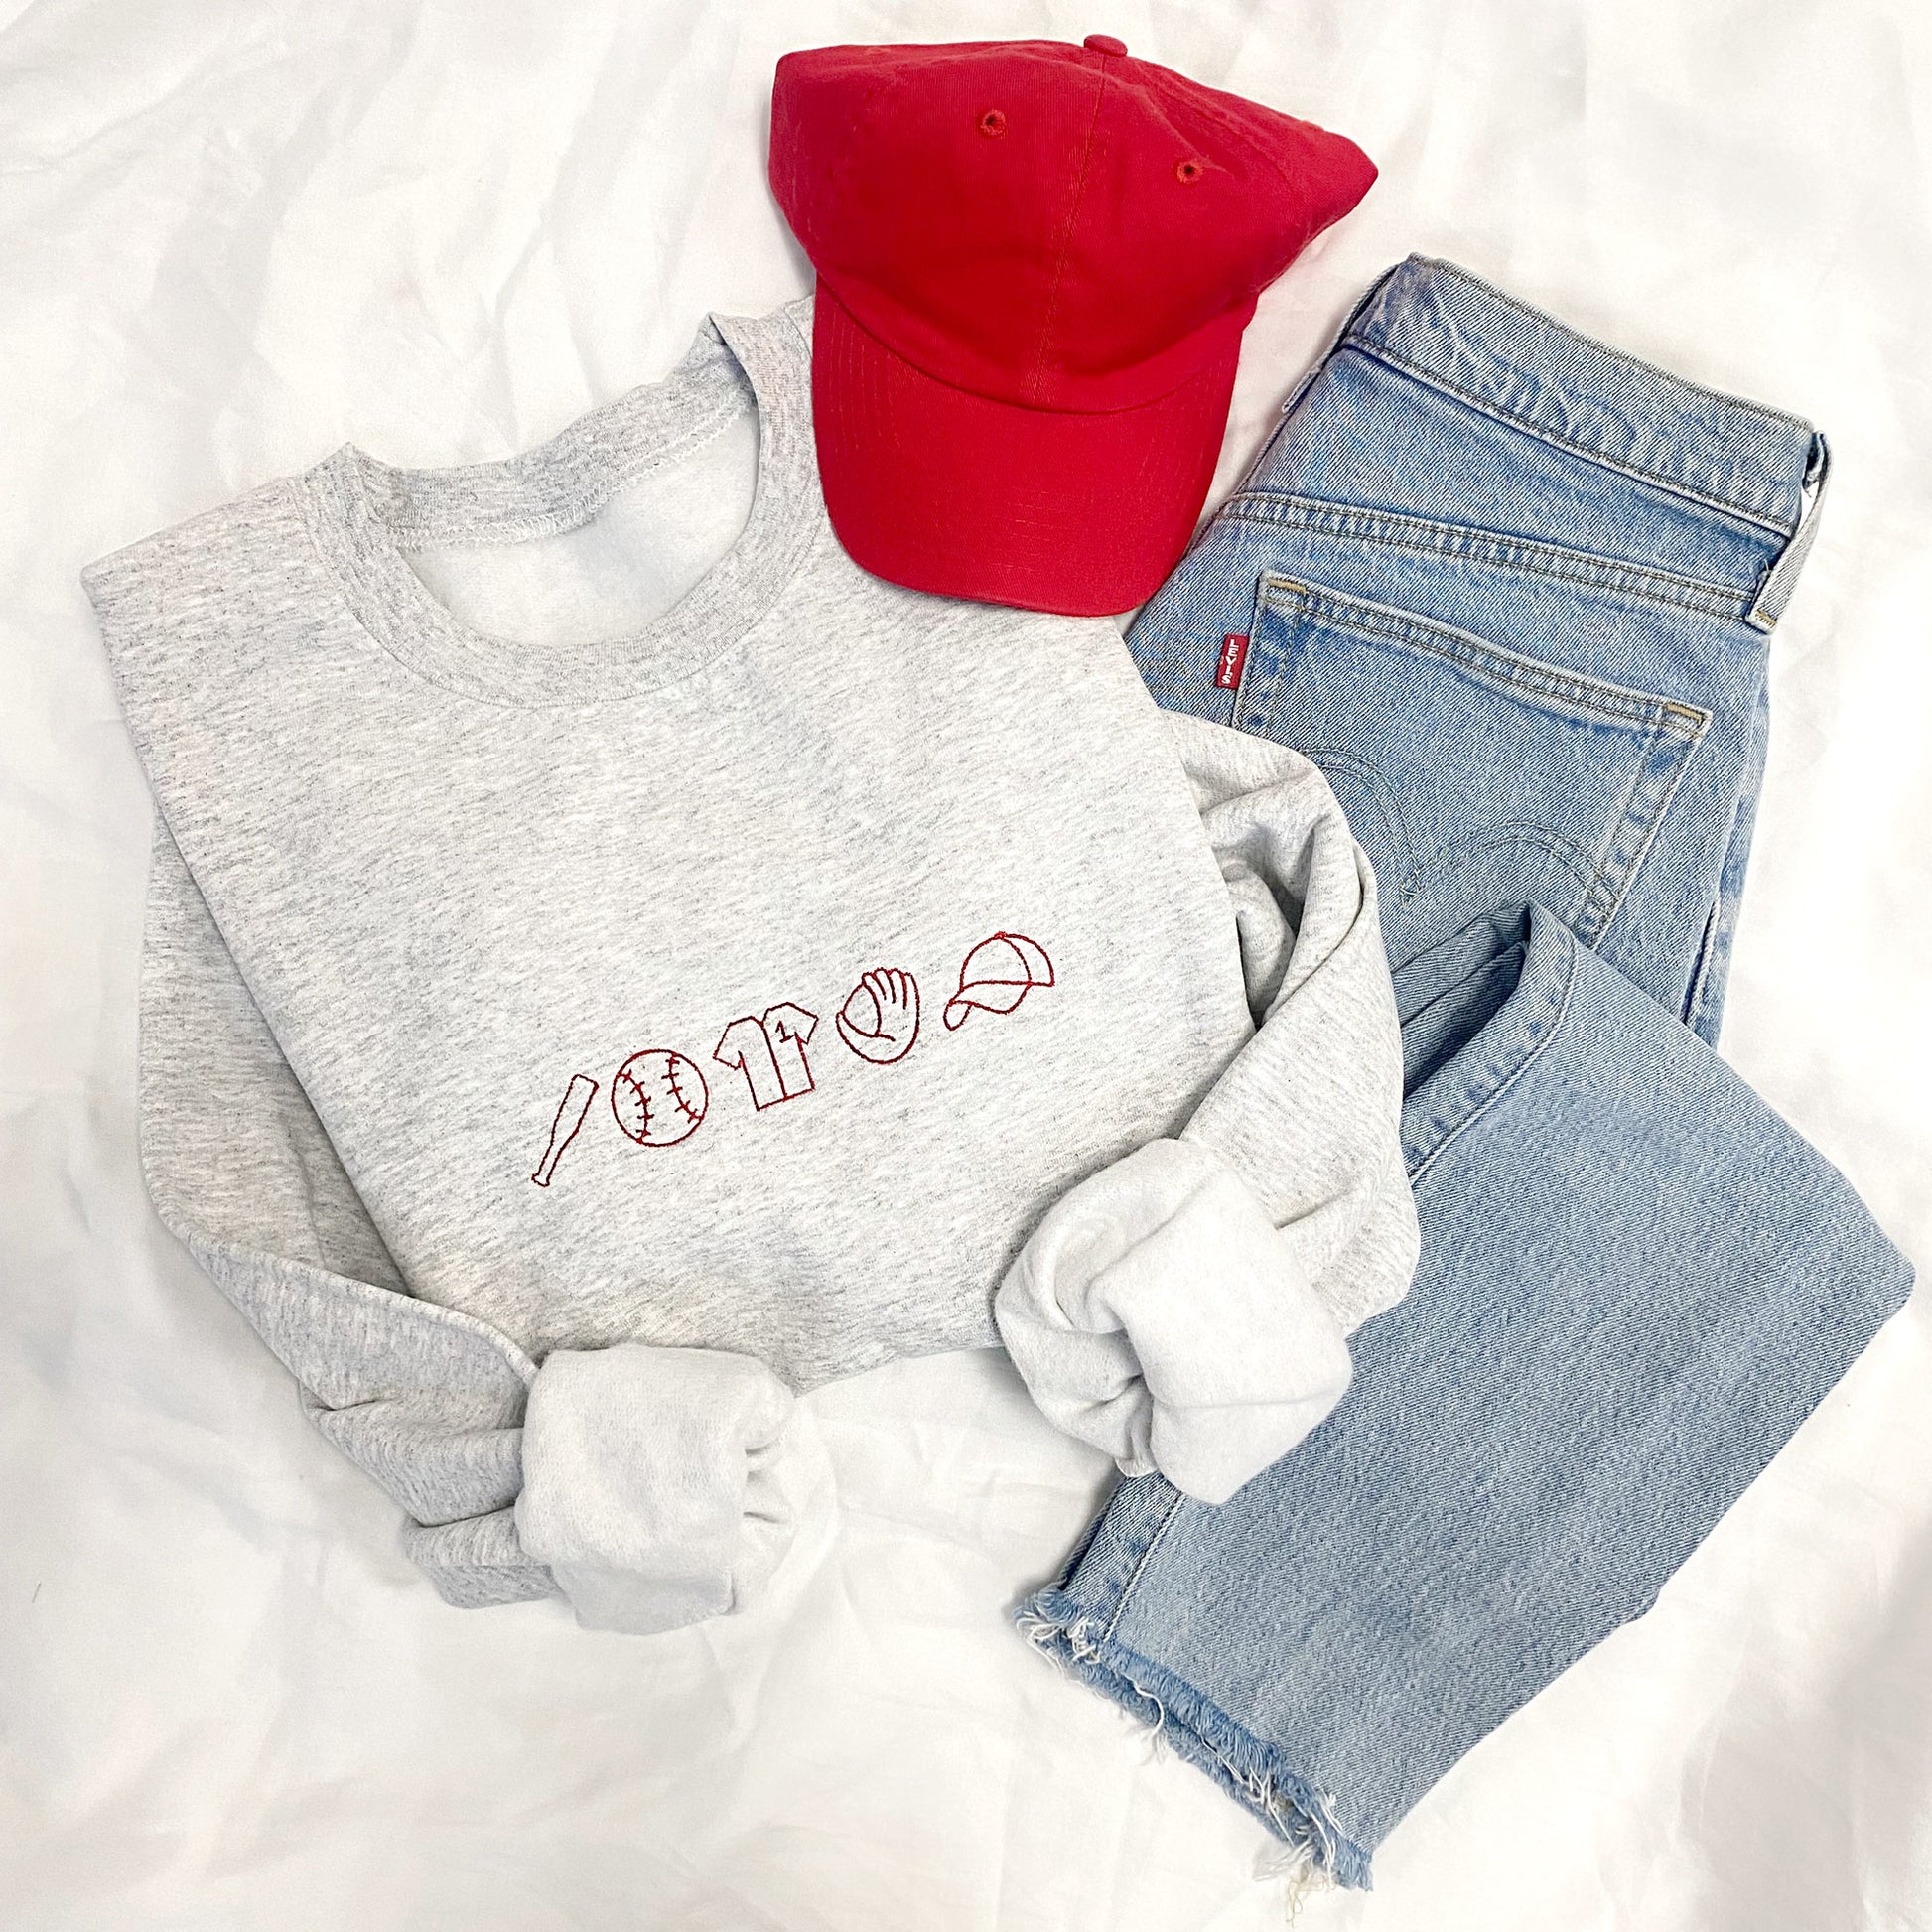 Ash crewneck sweatshirt with red embroidered baseball icons styled with a red baseball cap and blue jeans